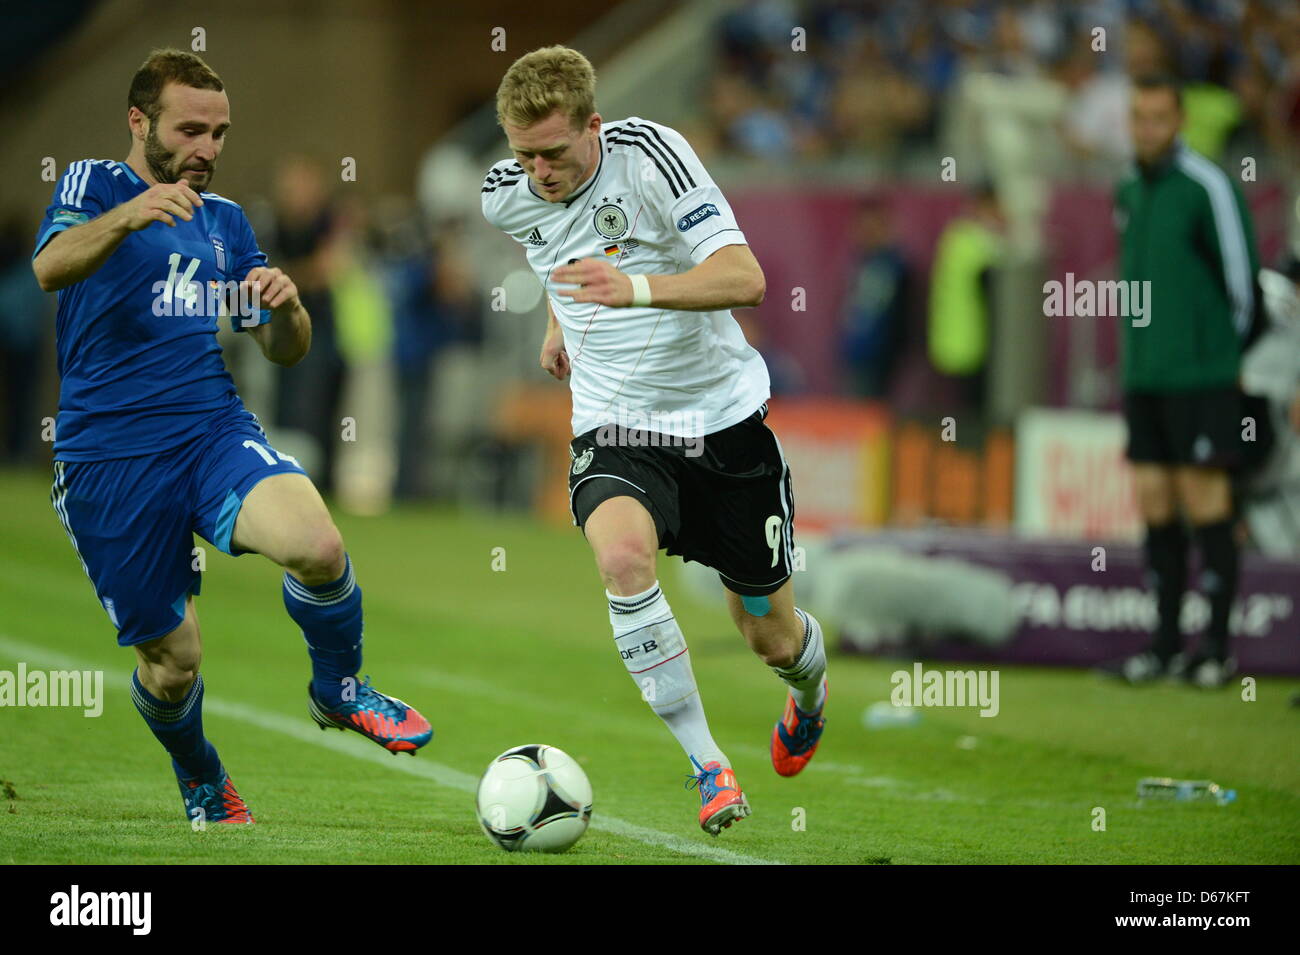 Germany's Andre Schuerrle (R) and Greece's Dimitris Salpingidis vie for the ball during the UEFA EURO 2012 quarter-final soccer match Germany vs Greece at Arena Gdansk in Gdansk, Poland, 22 June 2012. Photo: Andreas Gebert dpa (Please refer to chapters 7 and 8 of http://dpaq.de/Ziovh for UEFA Euro 2012 Terms & Conditions) Stock Photo